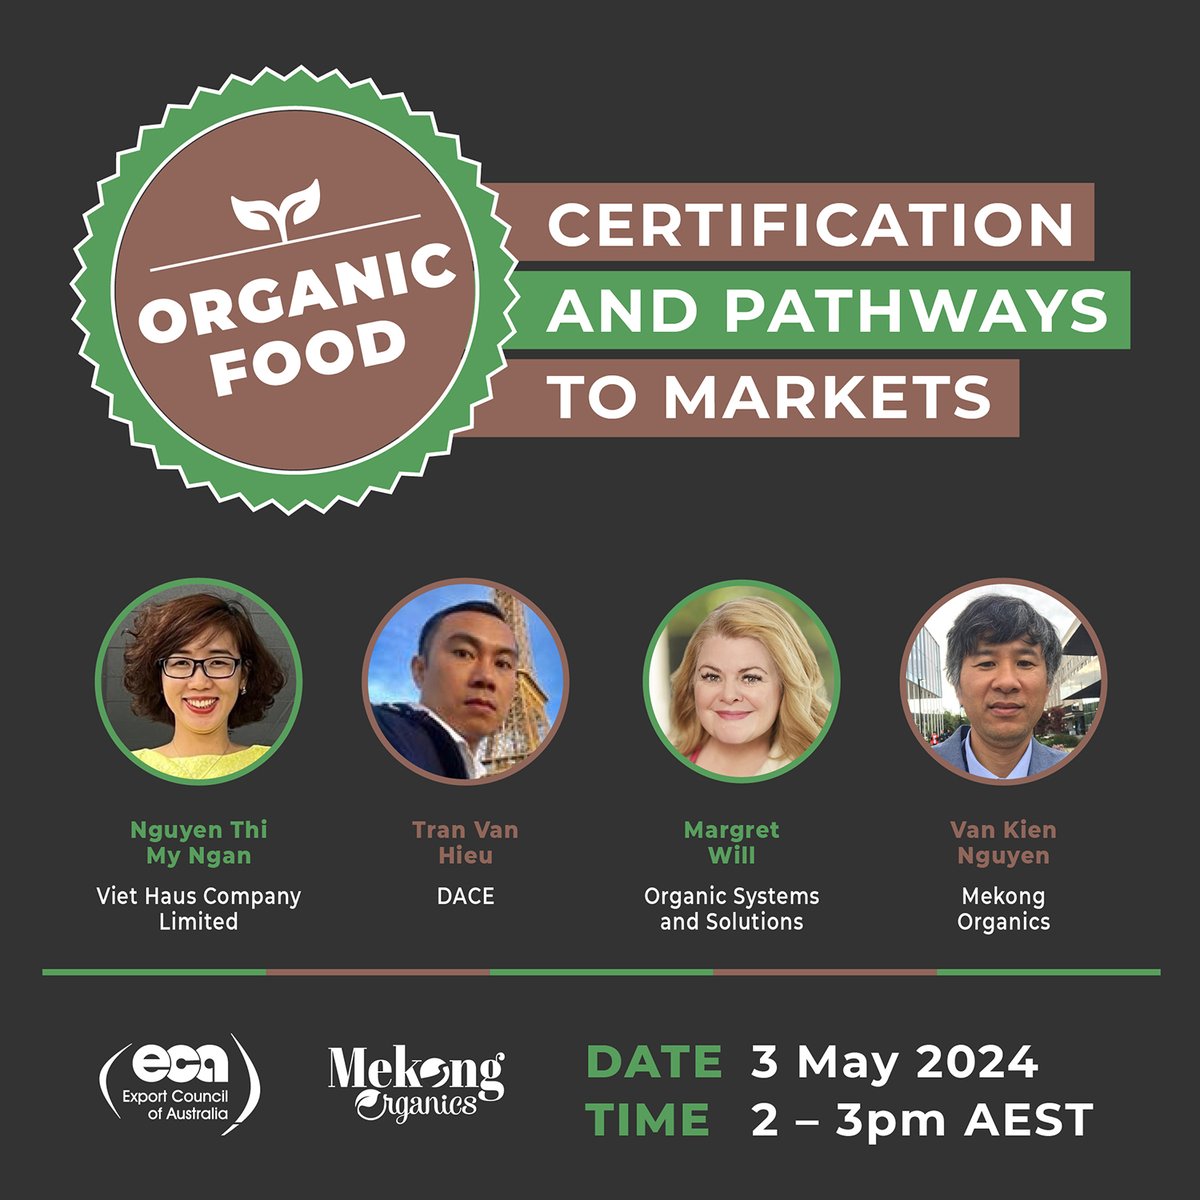 🌱 Our online webinar on Organic Food: Certification and Pathways to Markets is TOMORROW! 🌱

Do not miss the opportunity to explore regulatory compliance, global commercial strategies, and best practices.

Register now! Link in bio.
#foodbusiness #exporting